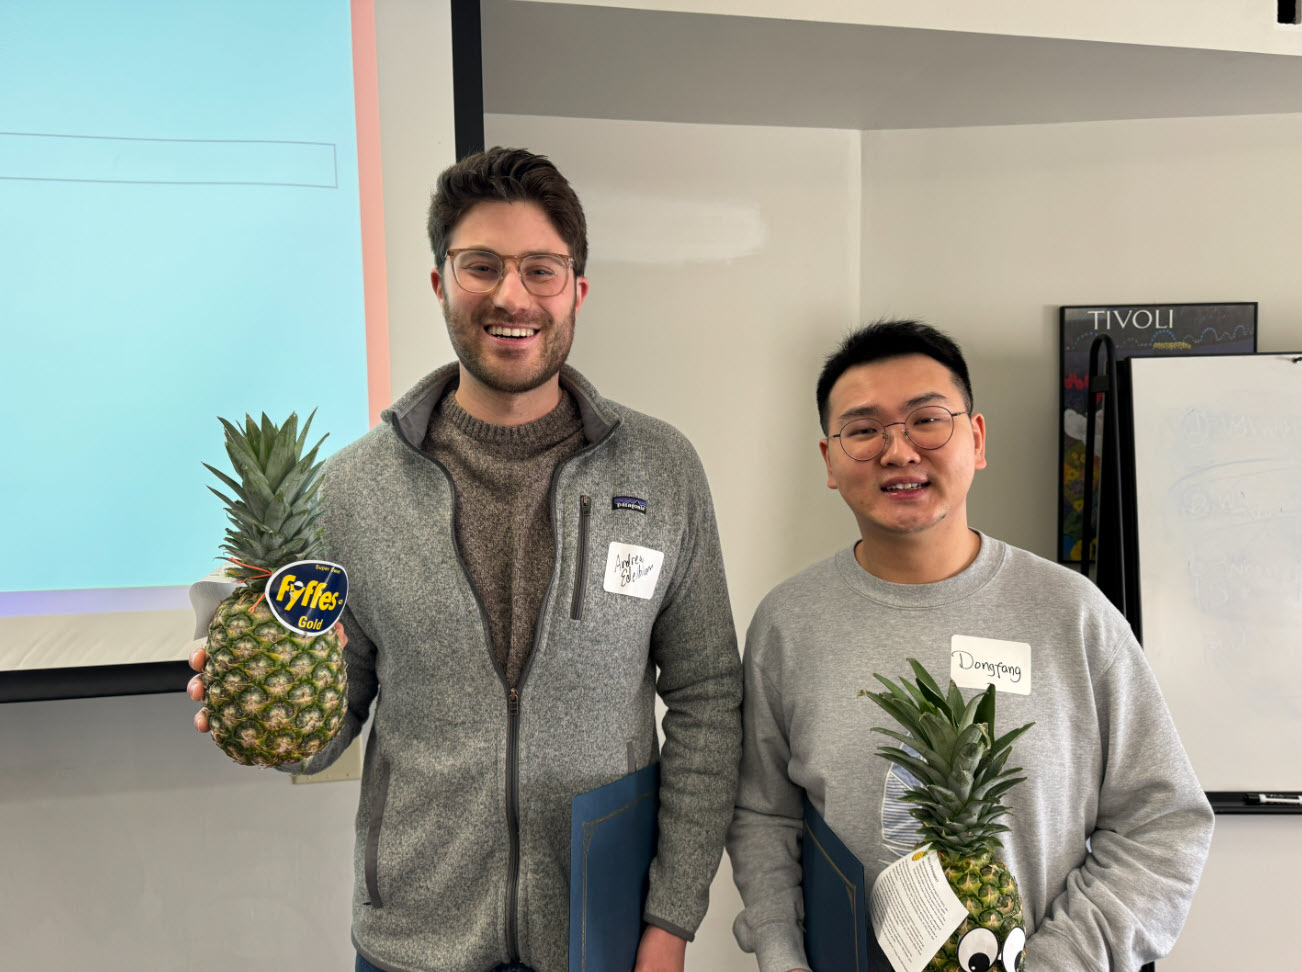 Faculty members Andrew Edelblum and Dongfang Gaozhao with pineapples to signify graduation from ATLS.